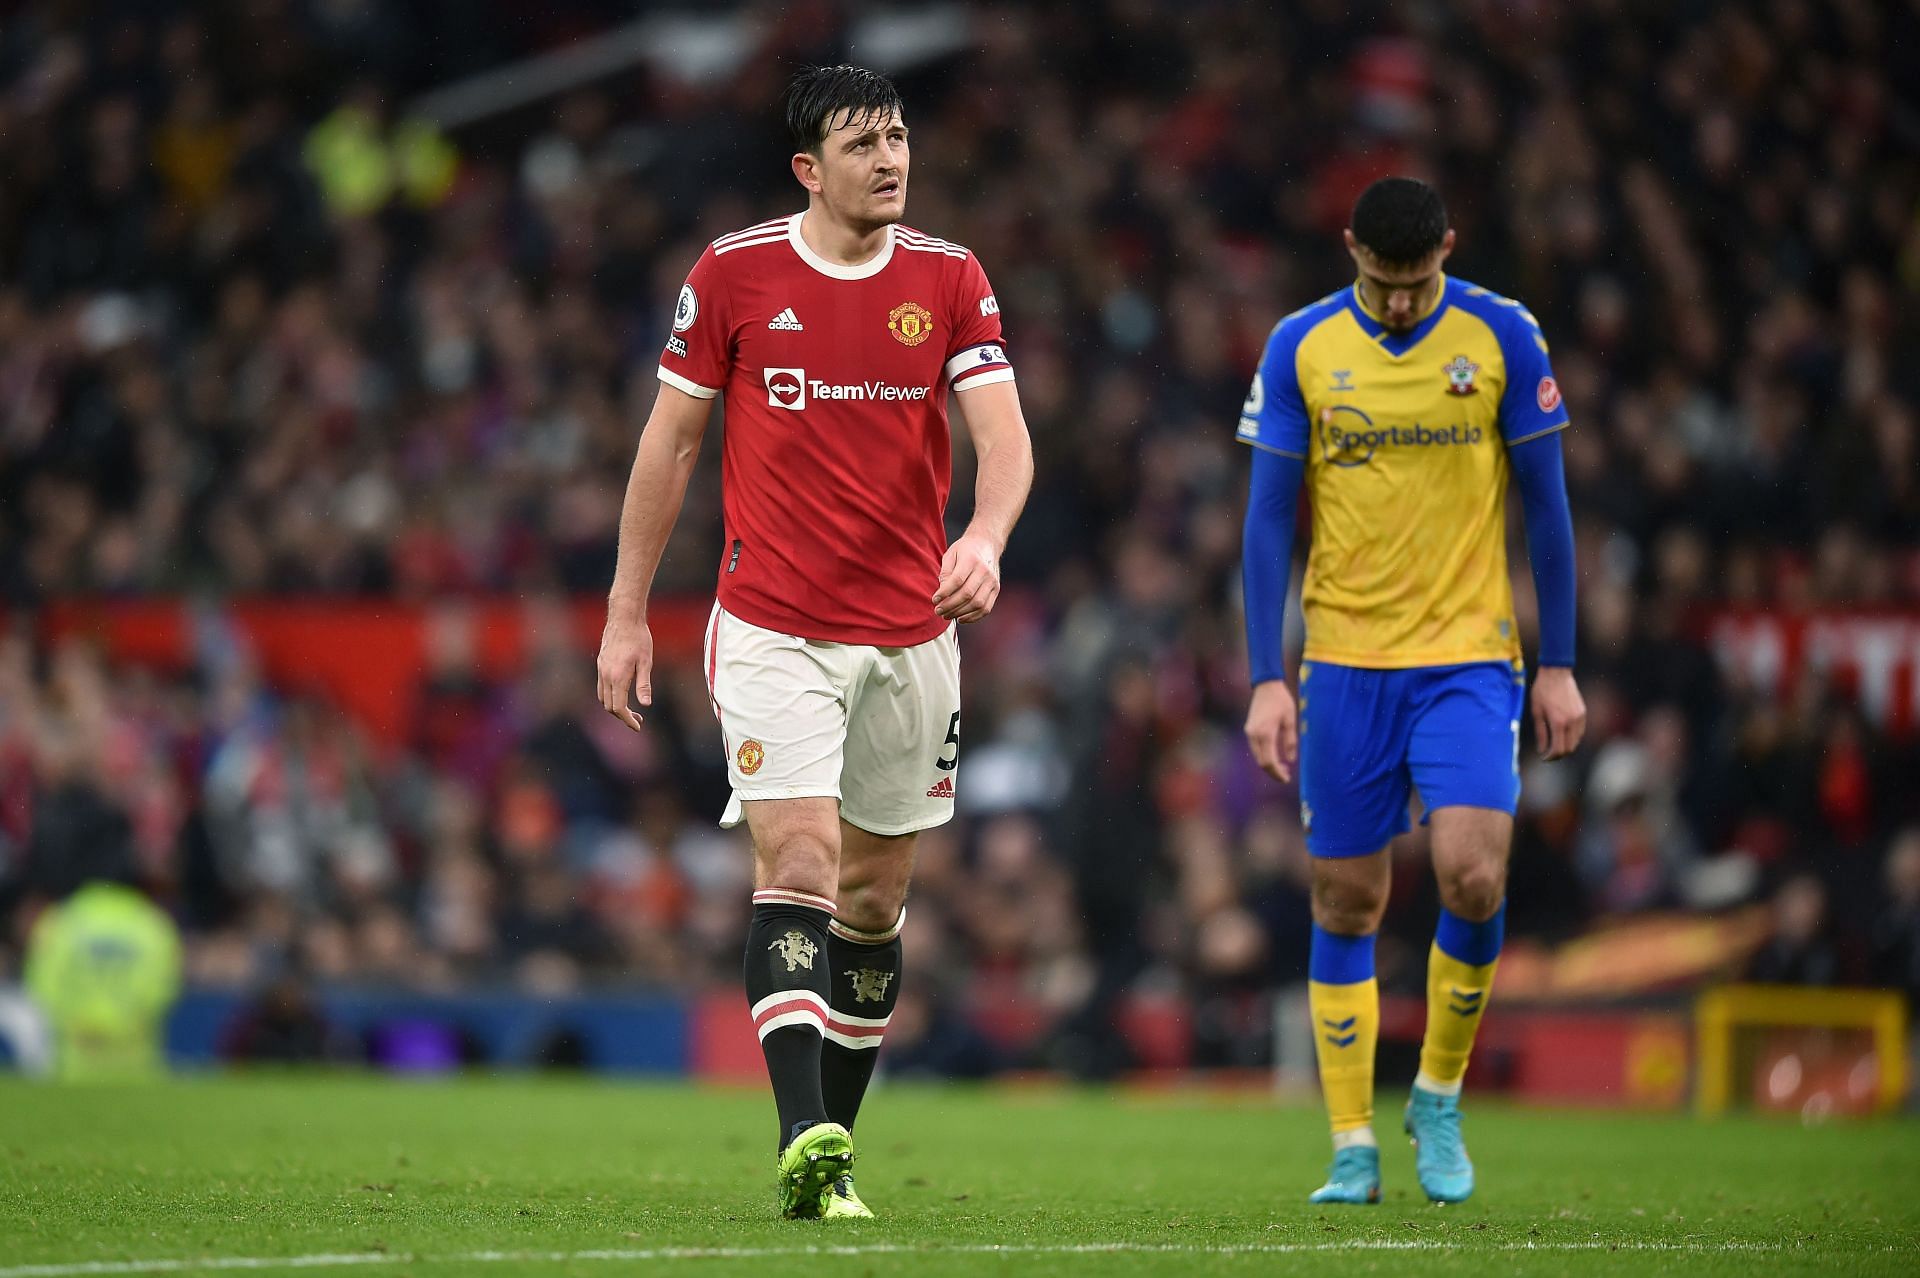 Michael Owen believes Harry Maguire (left) &rsquo;s lack of pace has become a problem for Manchester United.